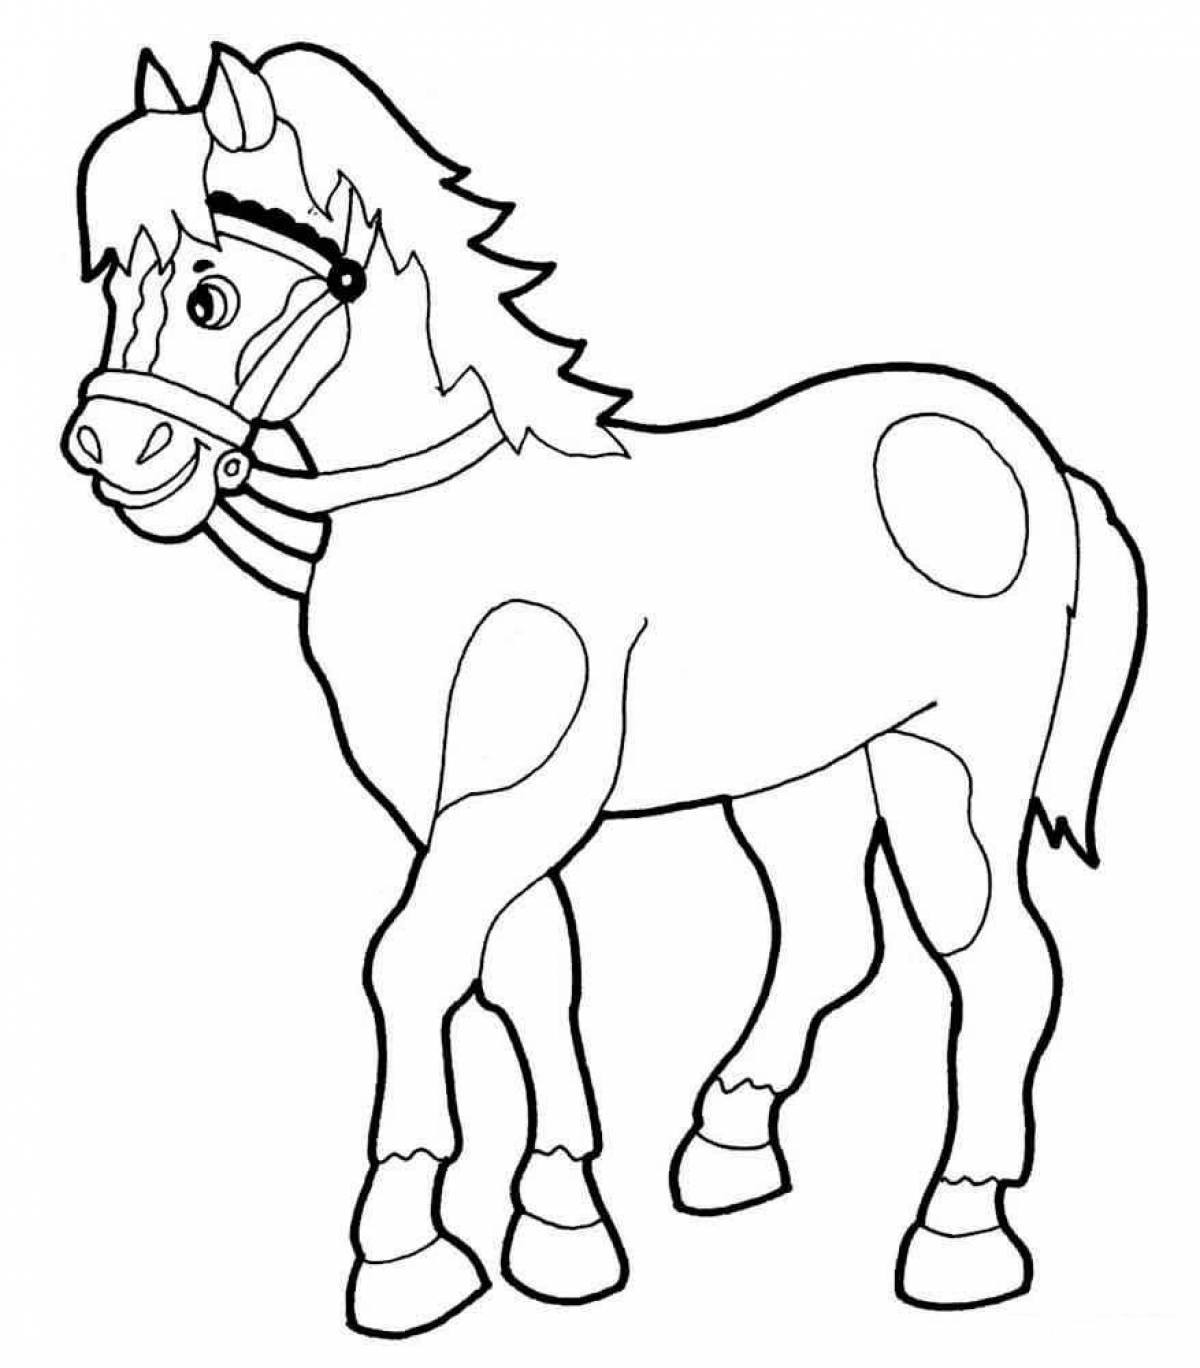 Horse for kids #6